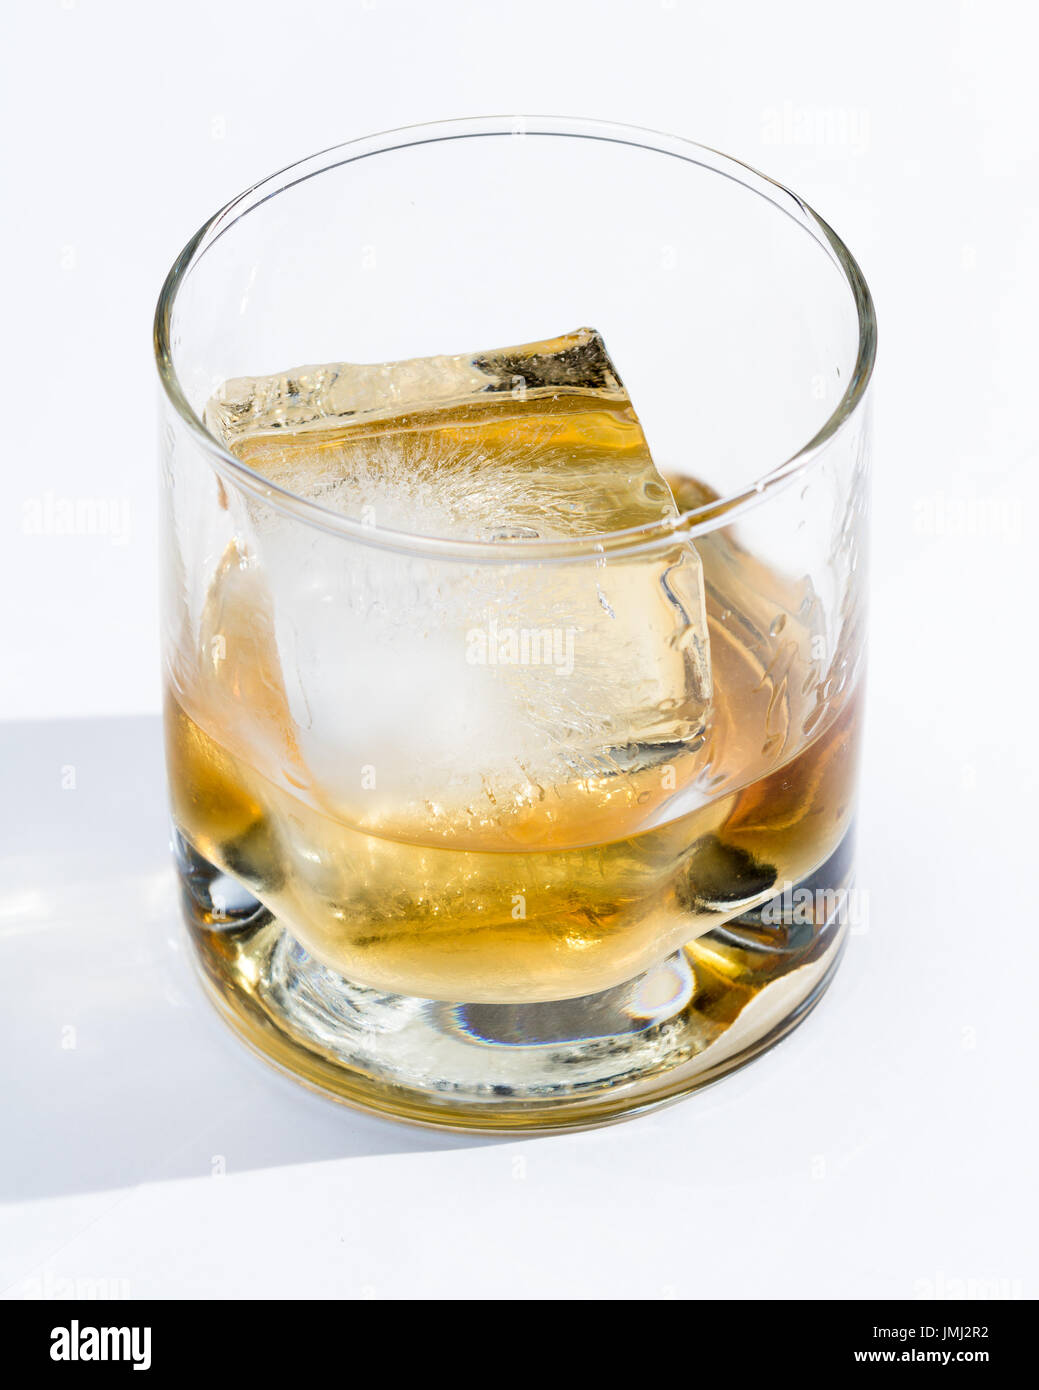 https://c8.alamy.com/comp/JMJ2R2/blended-scotch-whiskey-served-in-a-short-glass-with-a-large-ice-cube-JMJ2R2.jpg